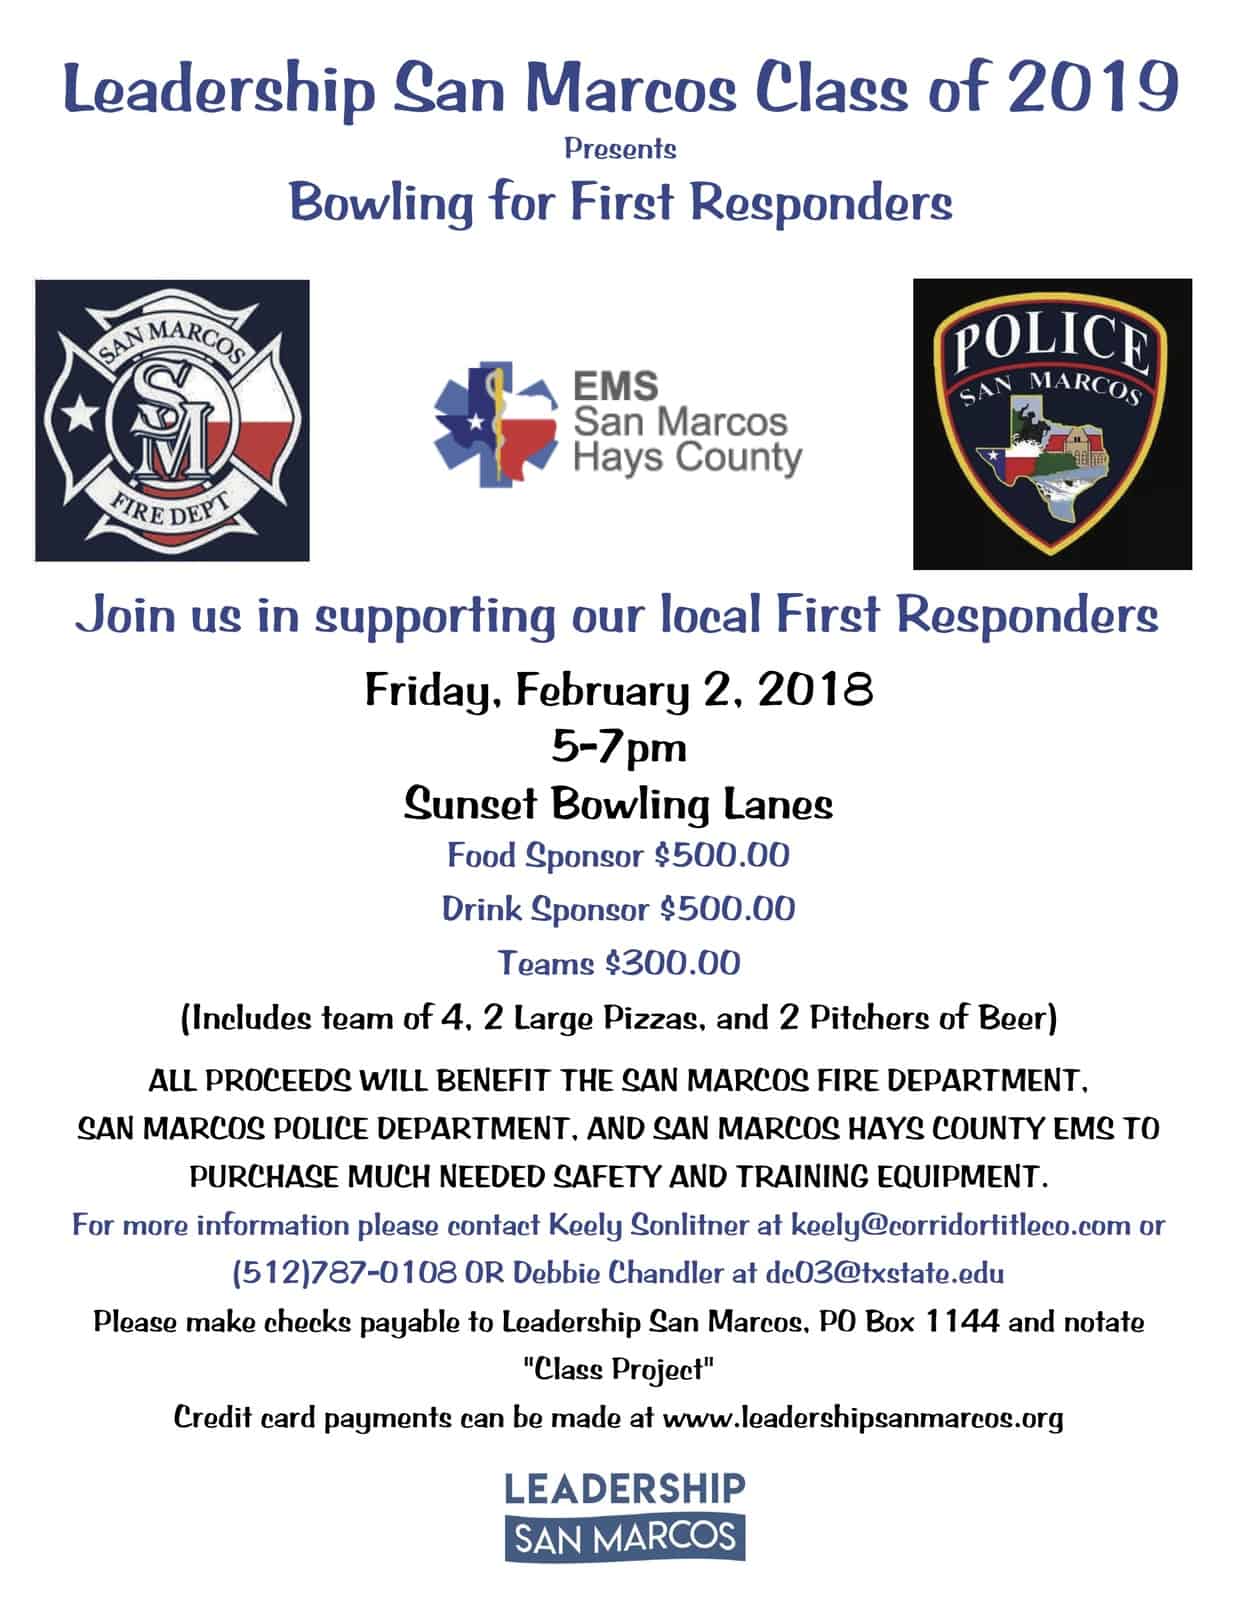 Bowling for First Responders